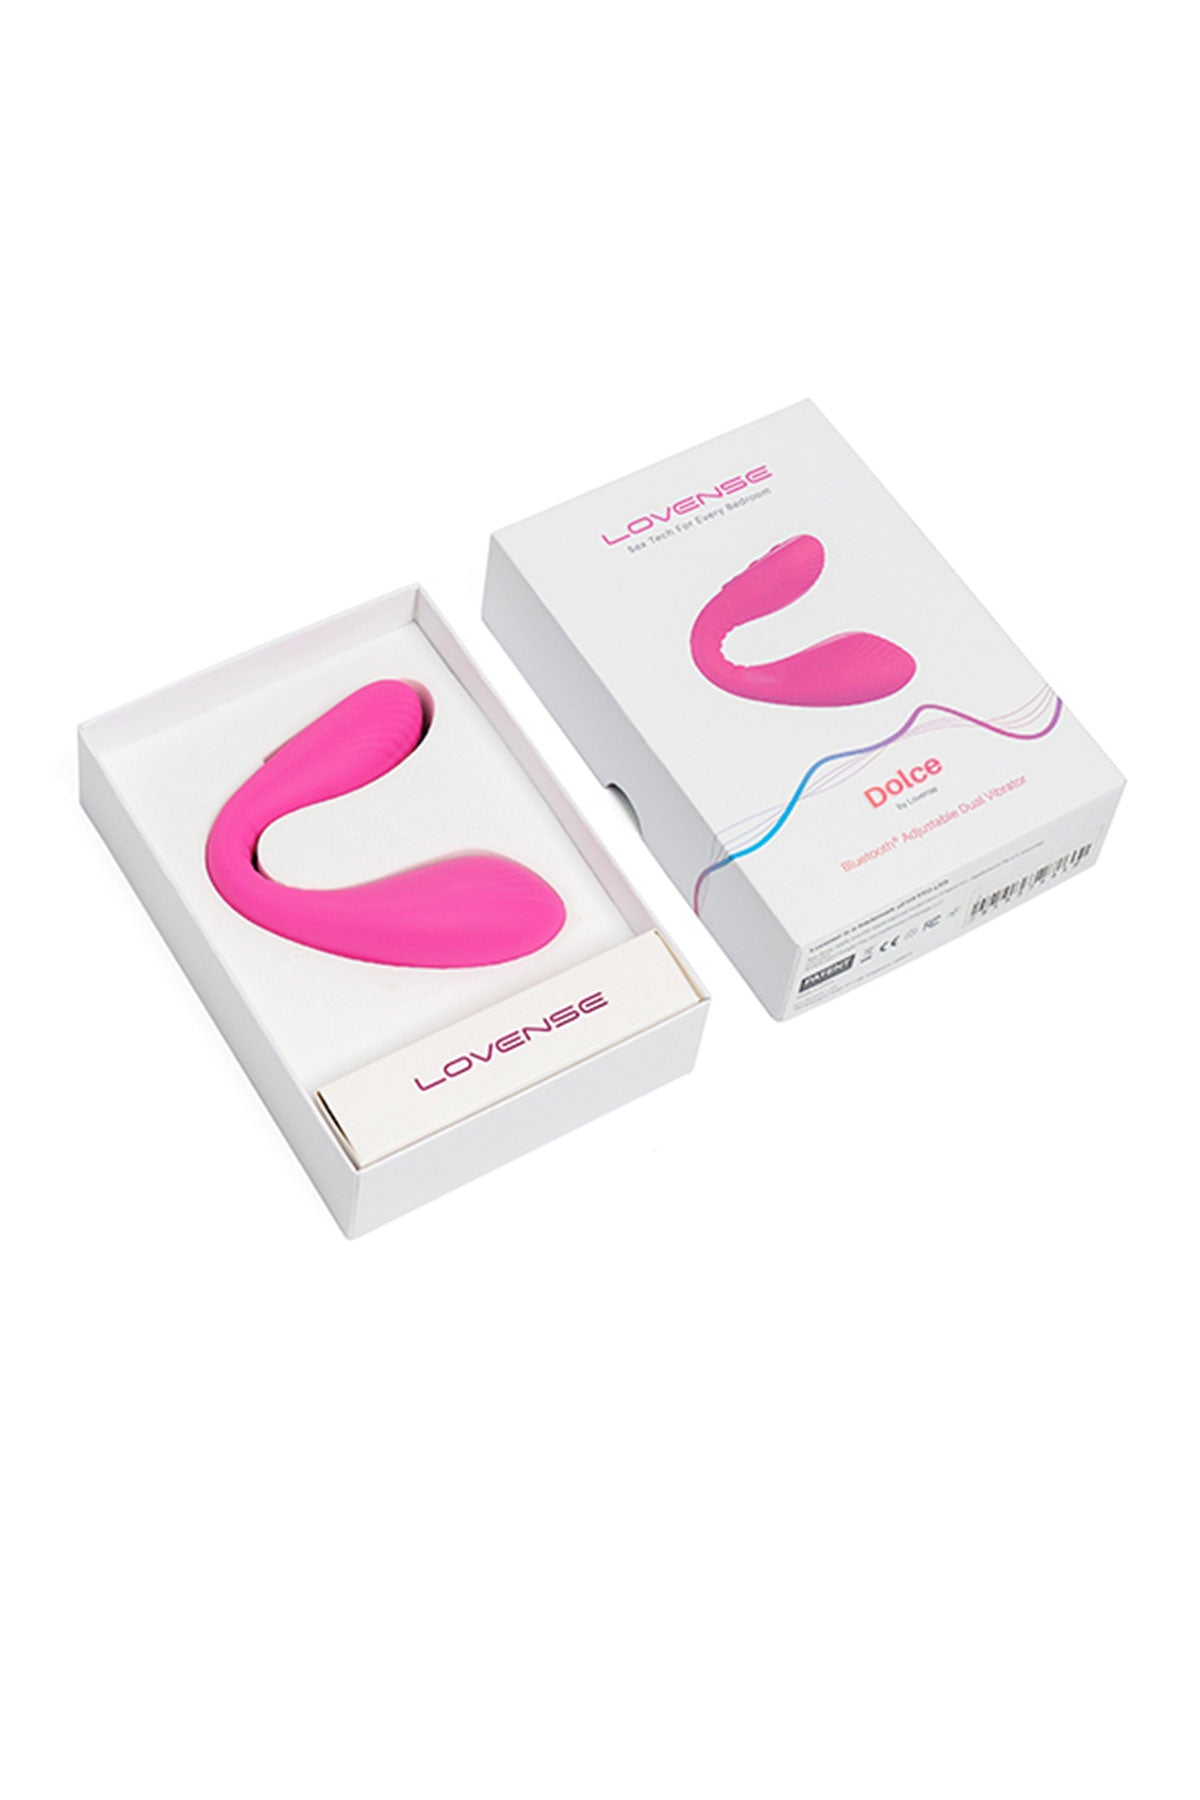 Dolce | Dual-ended Vibrator